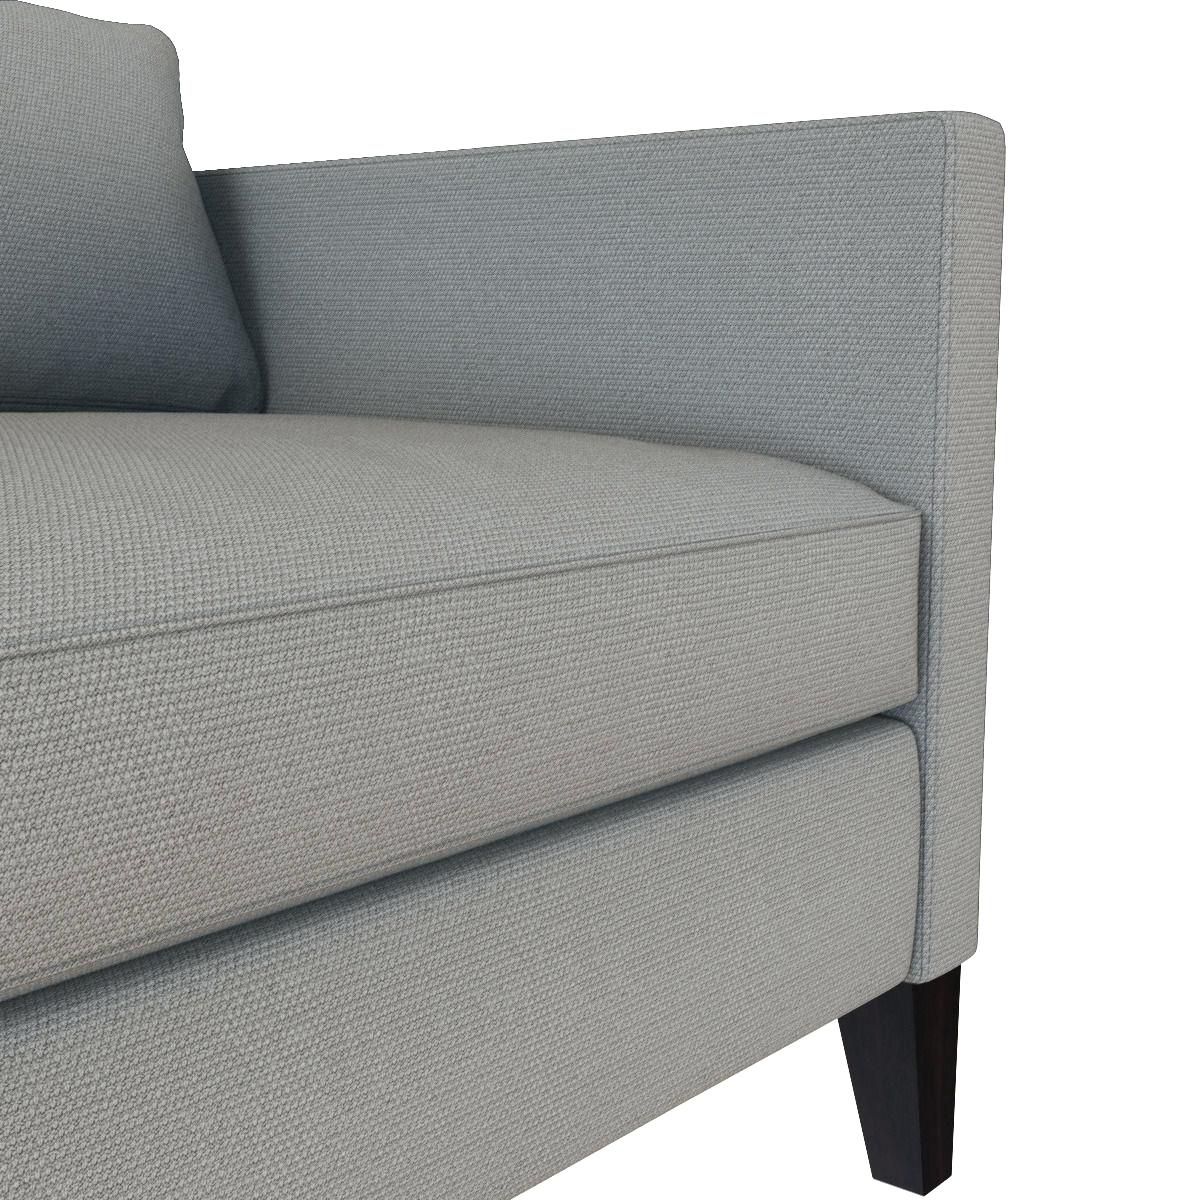 Popular Down Filled Sofas Pertaining To Down Filled Sofa Sa With Chaise Fibre Or Foam Fabric (View 19 of 20)